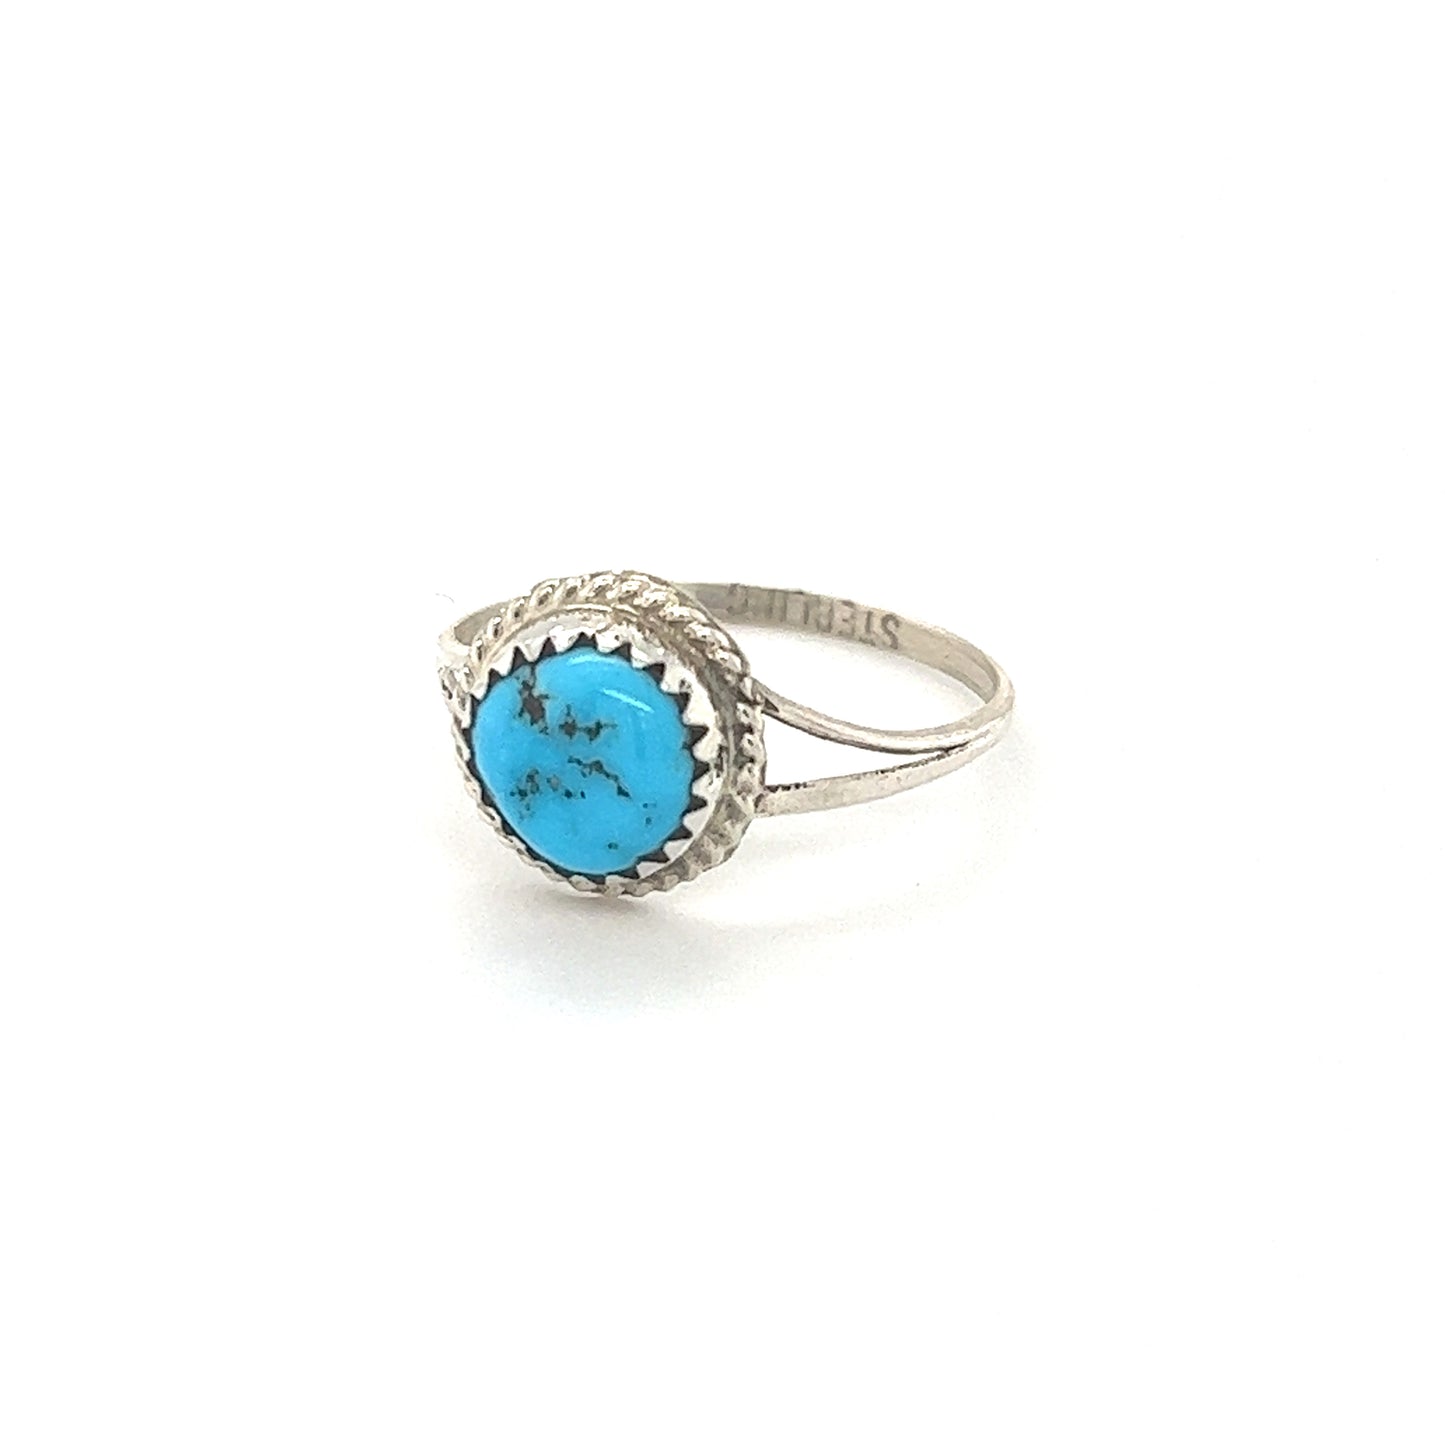 A culturally inspired sterling silver Classic Round Handmade Turquoise Ring.